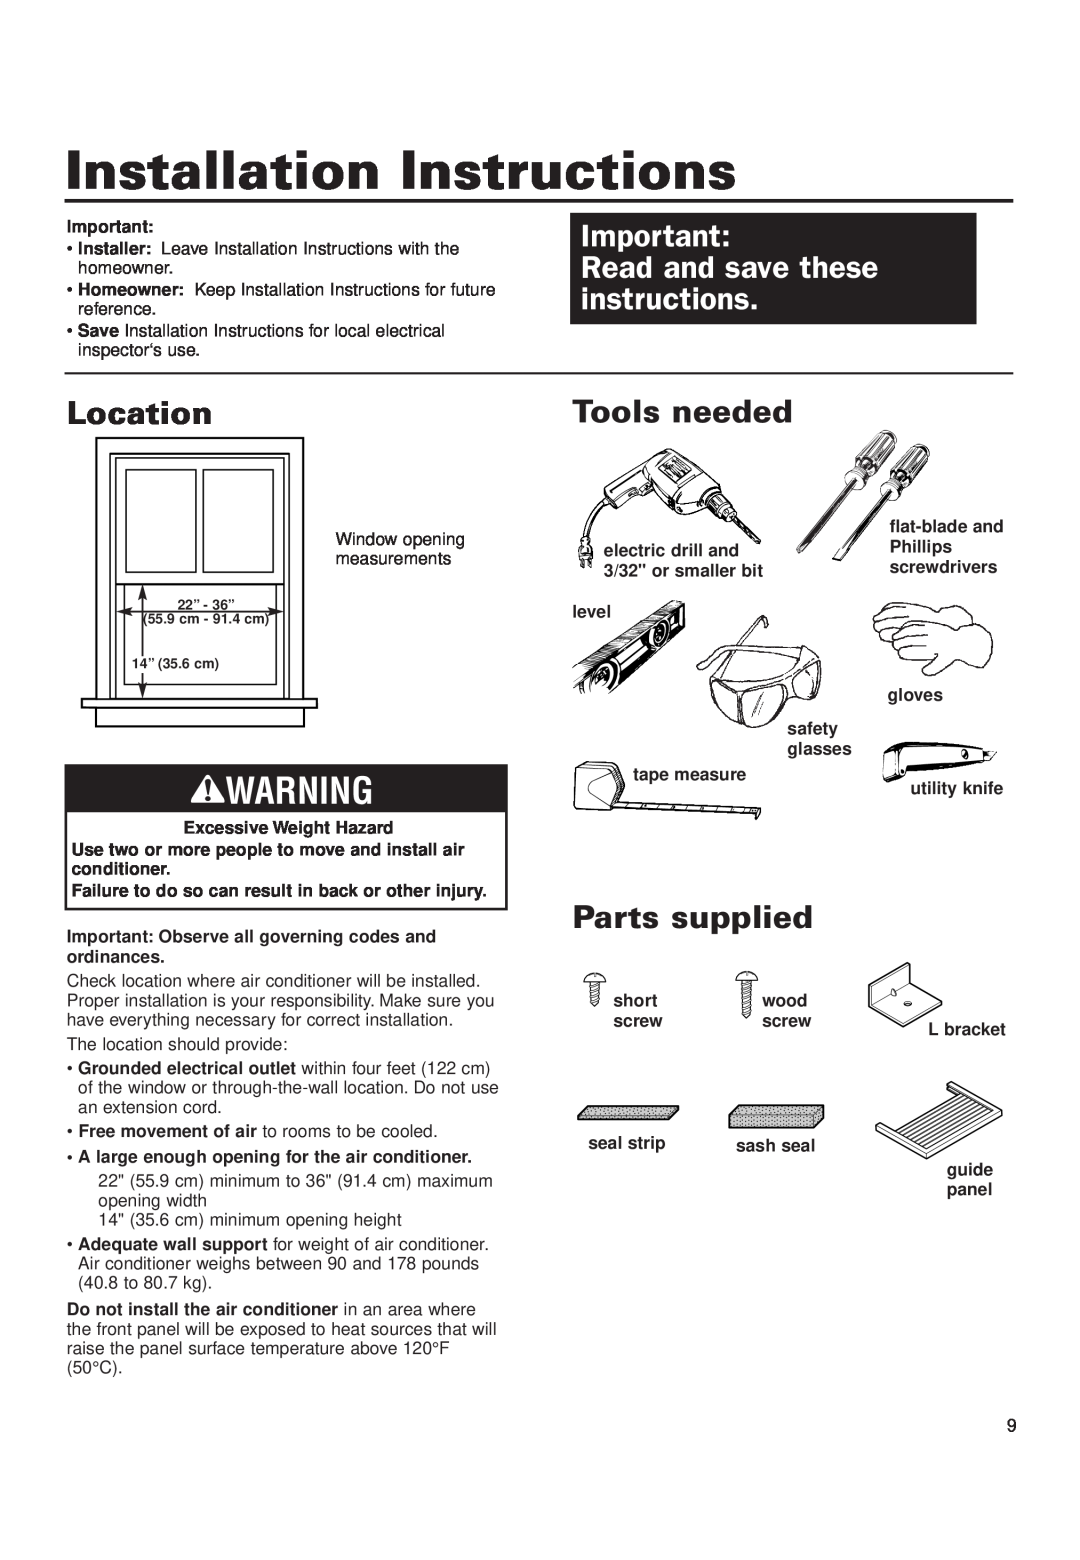 Whirlpool ACD052PK0 Installation Instructions, Read and save these instructions, Location, Tools needed, Parts supplied 